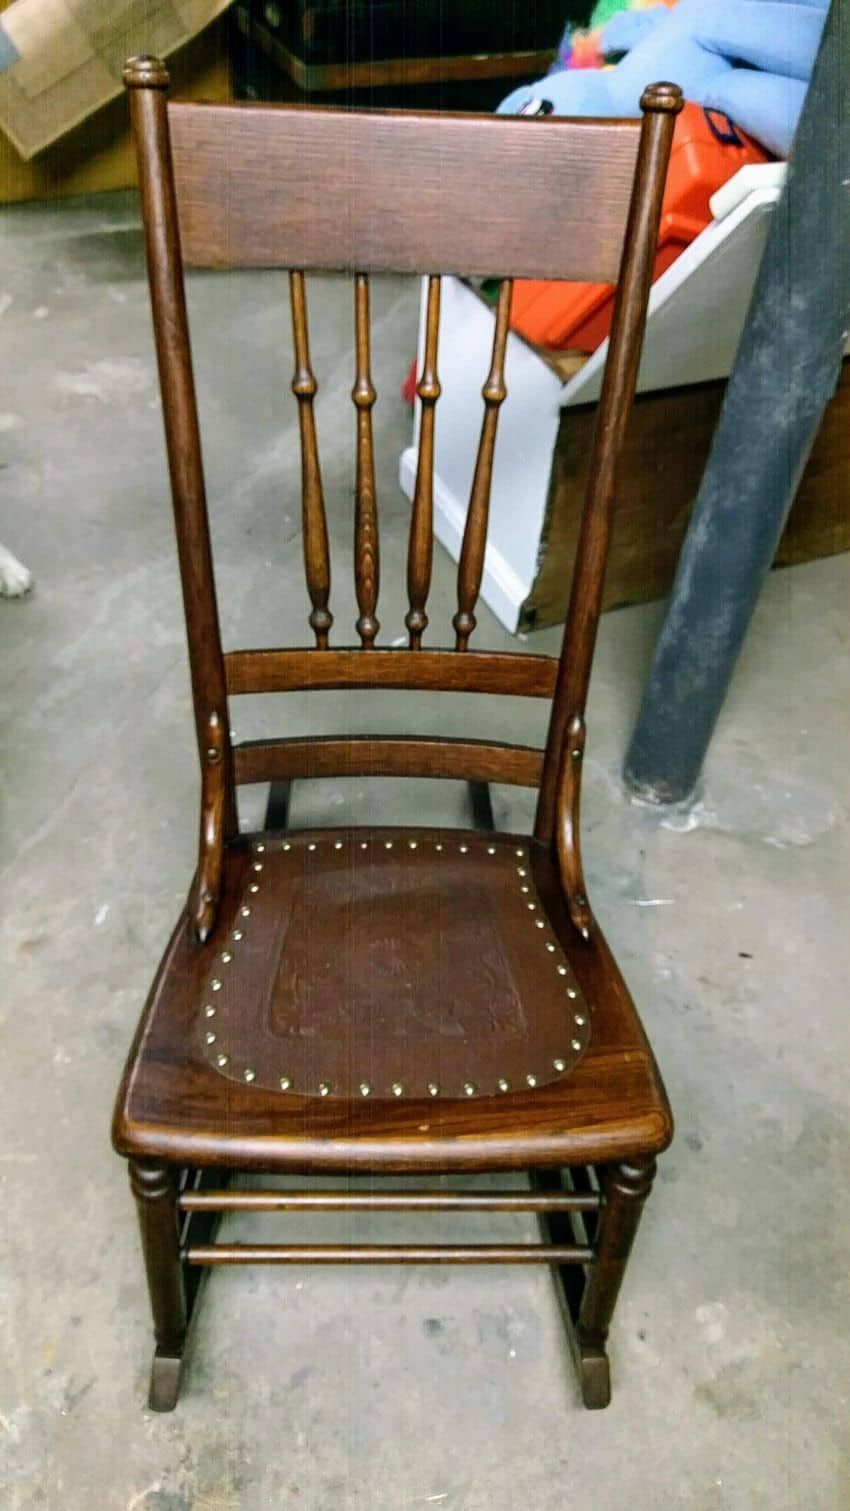 How to Replace a Leather Seat in an Antique Chair - Everyday Old House